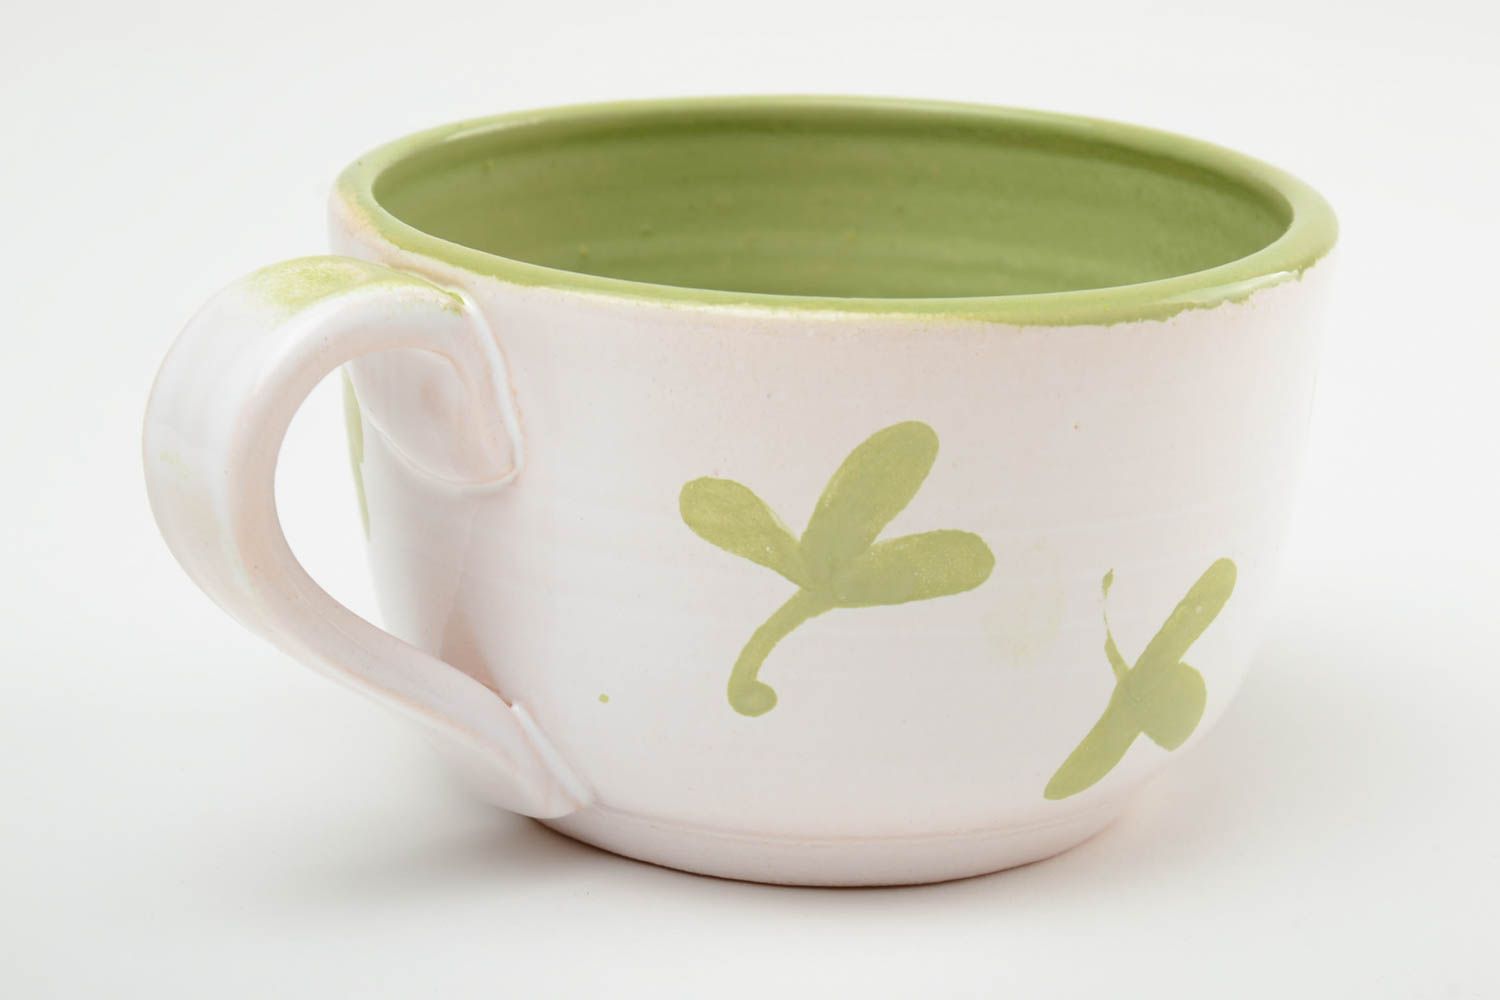 11 oz lime glazed ceramic teacup with handle and heart pattern photo 4